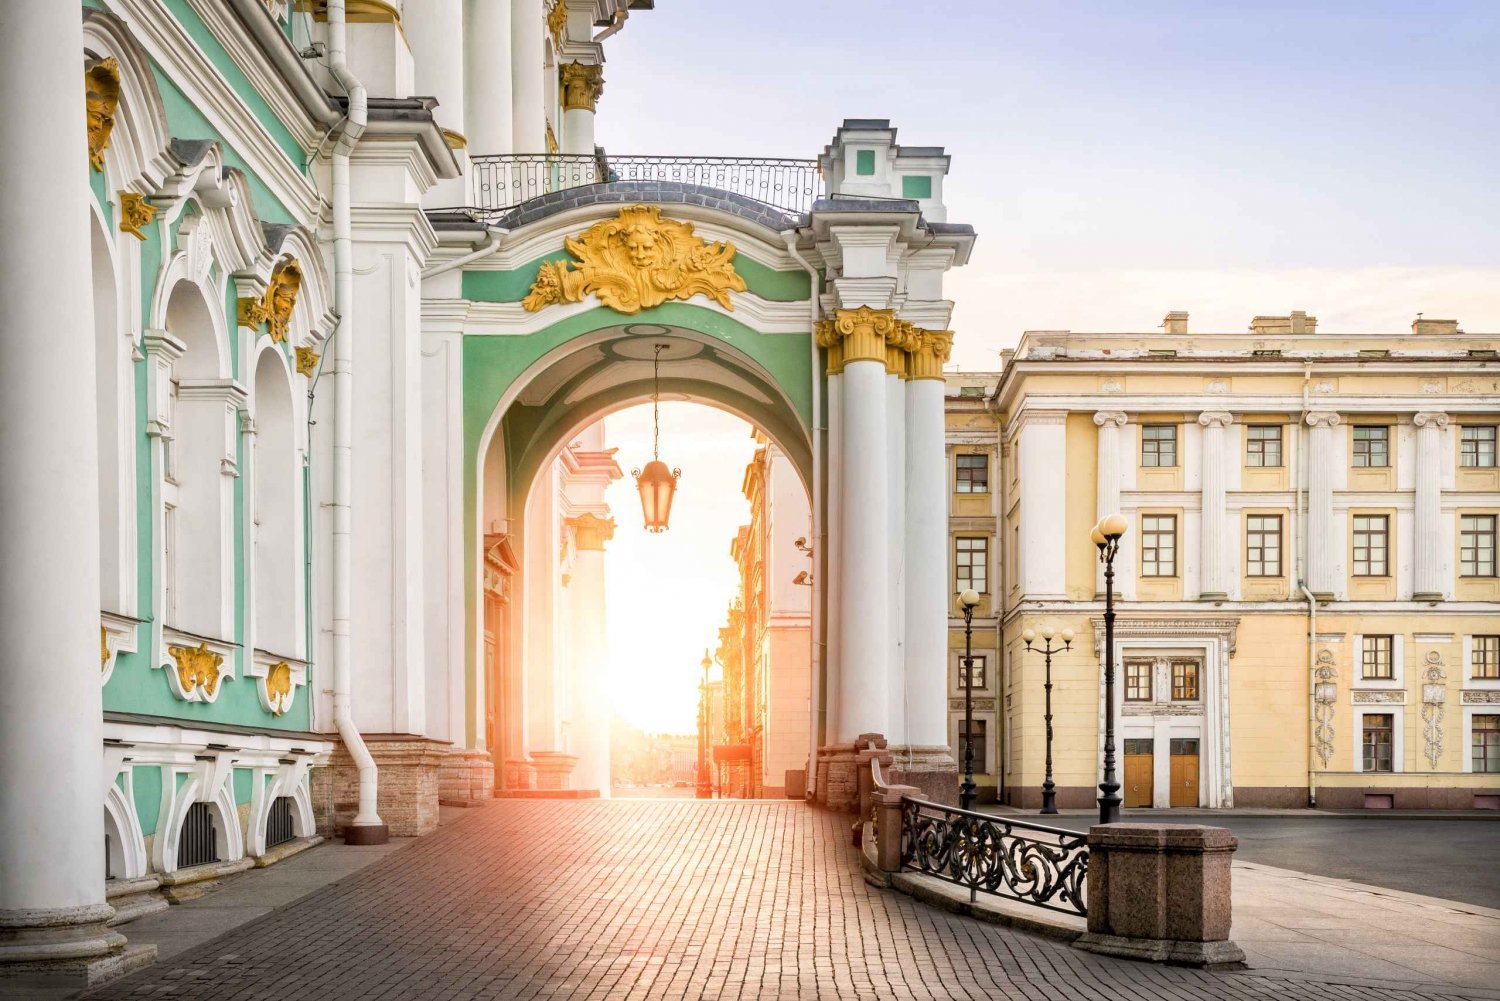 Private Half-Day Tour of St. Petersburg with Driver & Guide